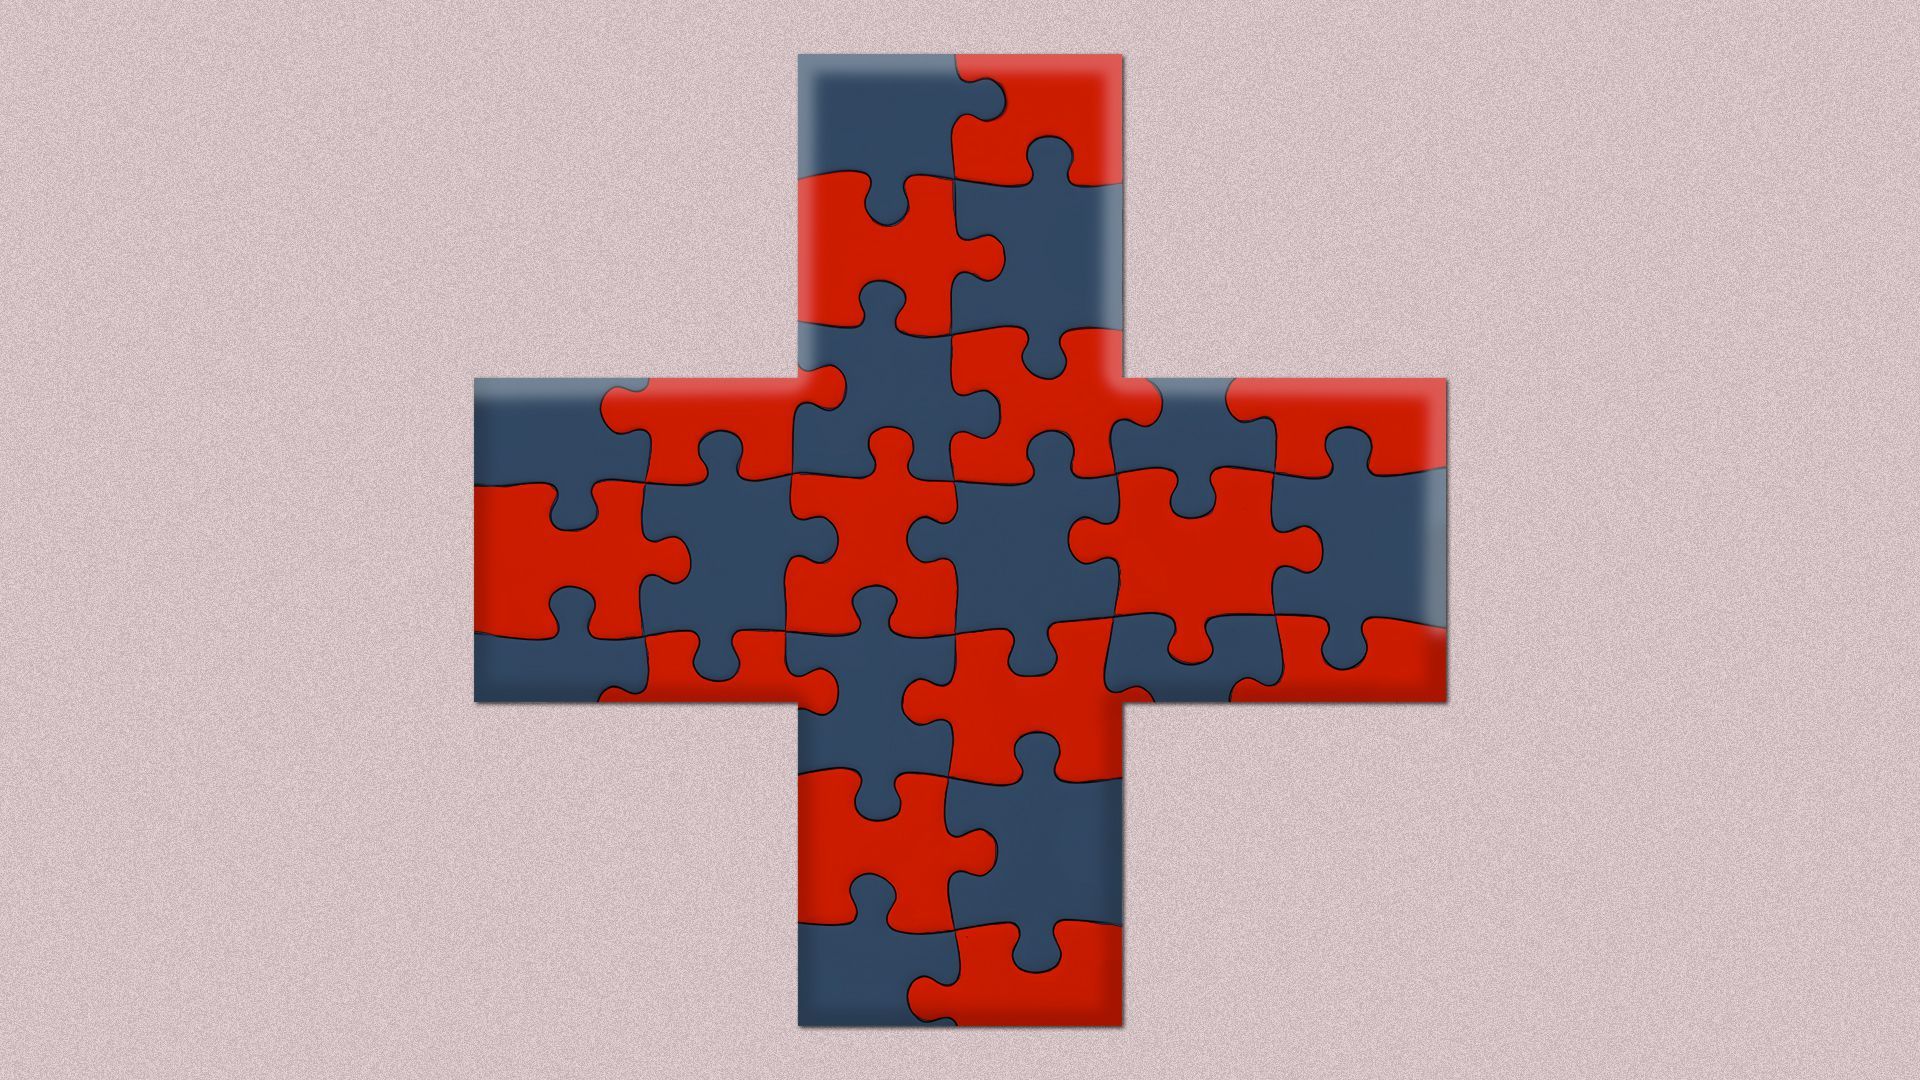 Illustration of a red cross made out of red and blue puzzle pieces.